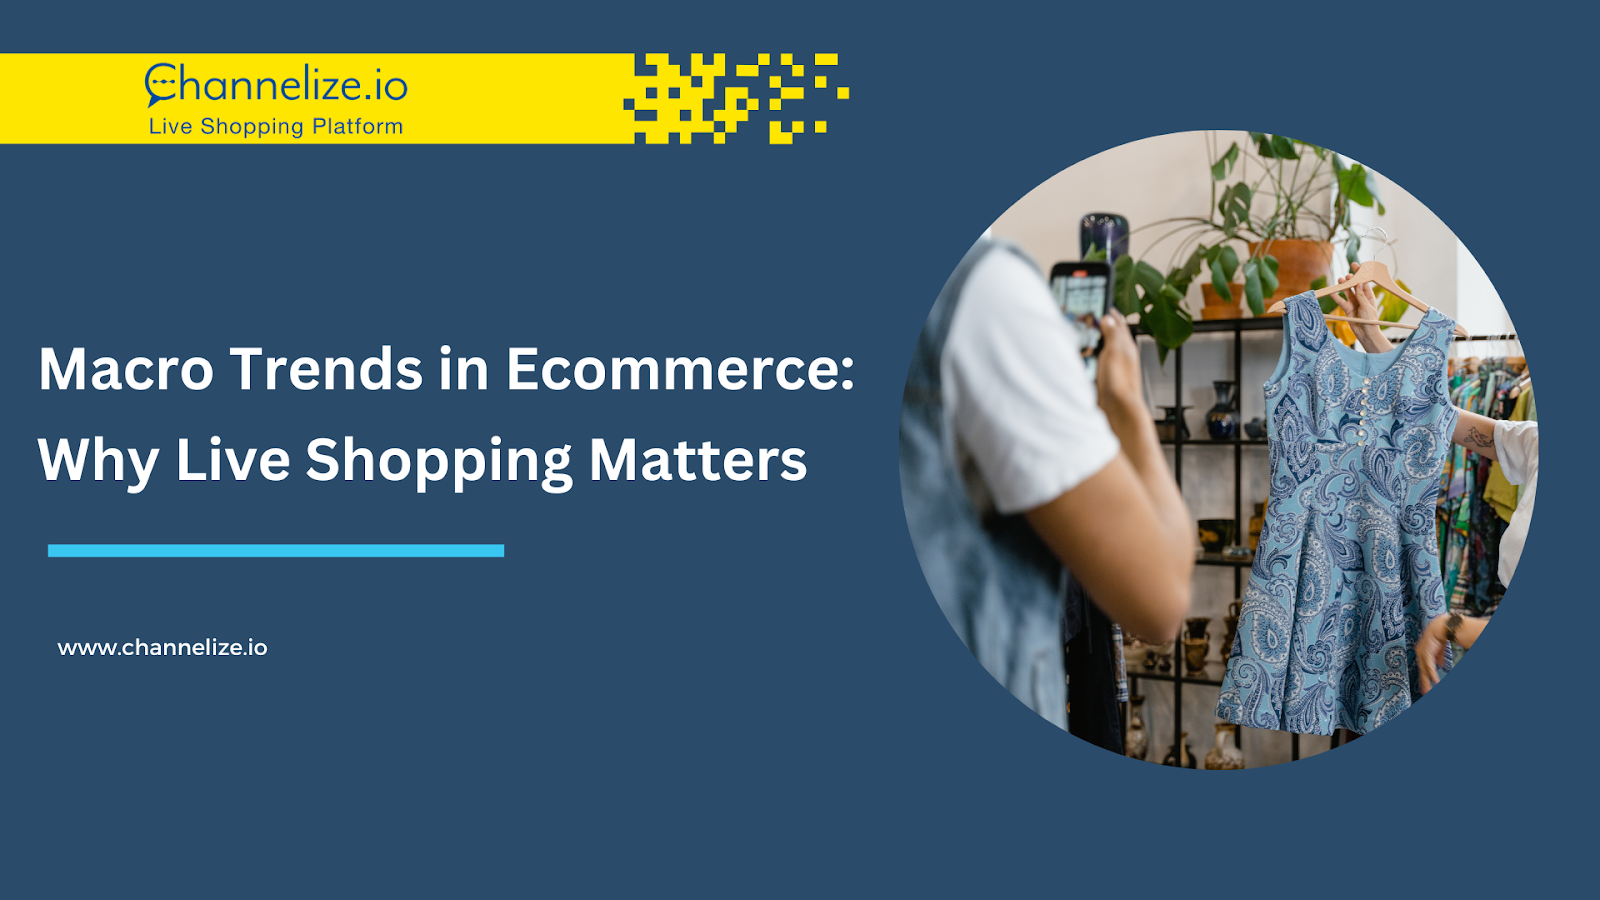 Macro Trends in Ecommerce: Why Live Shopping Matters